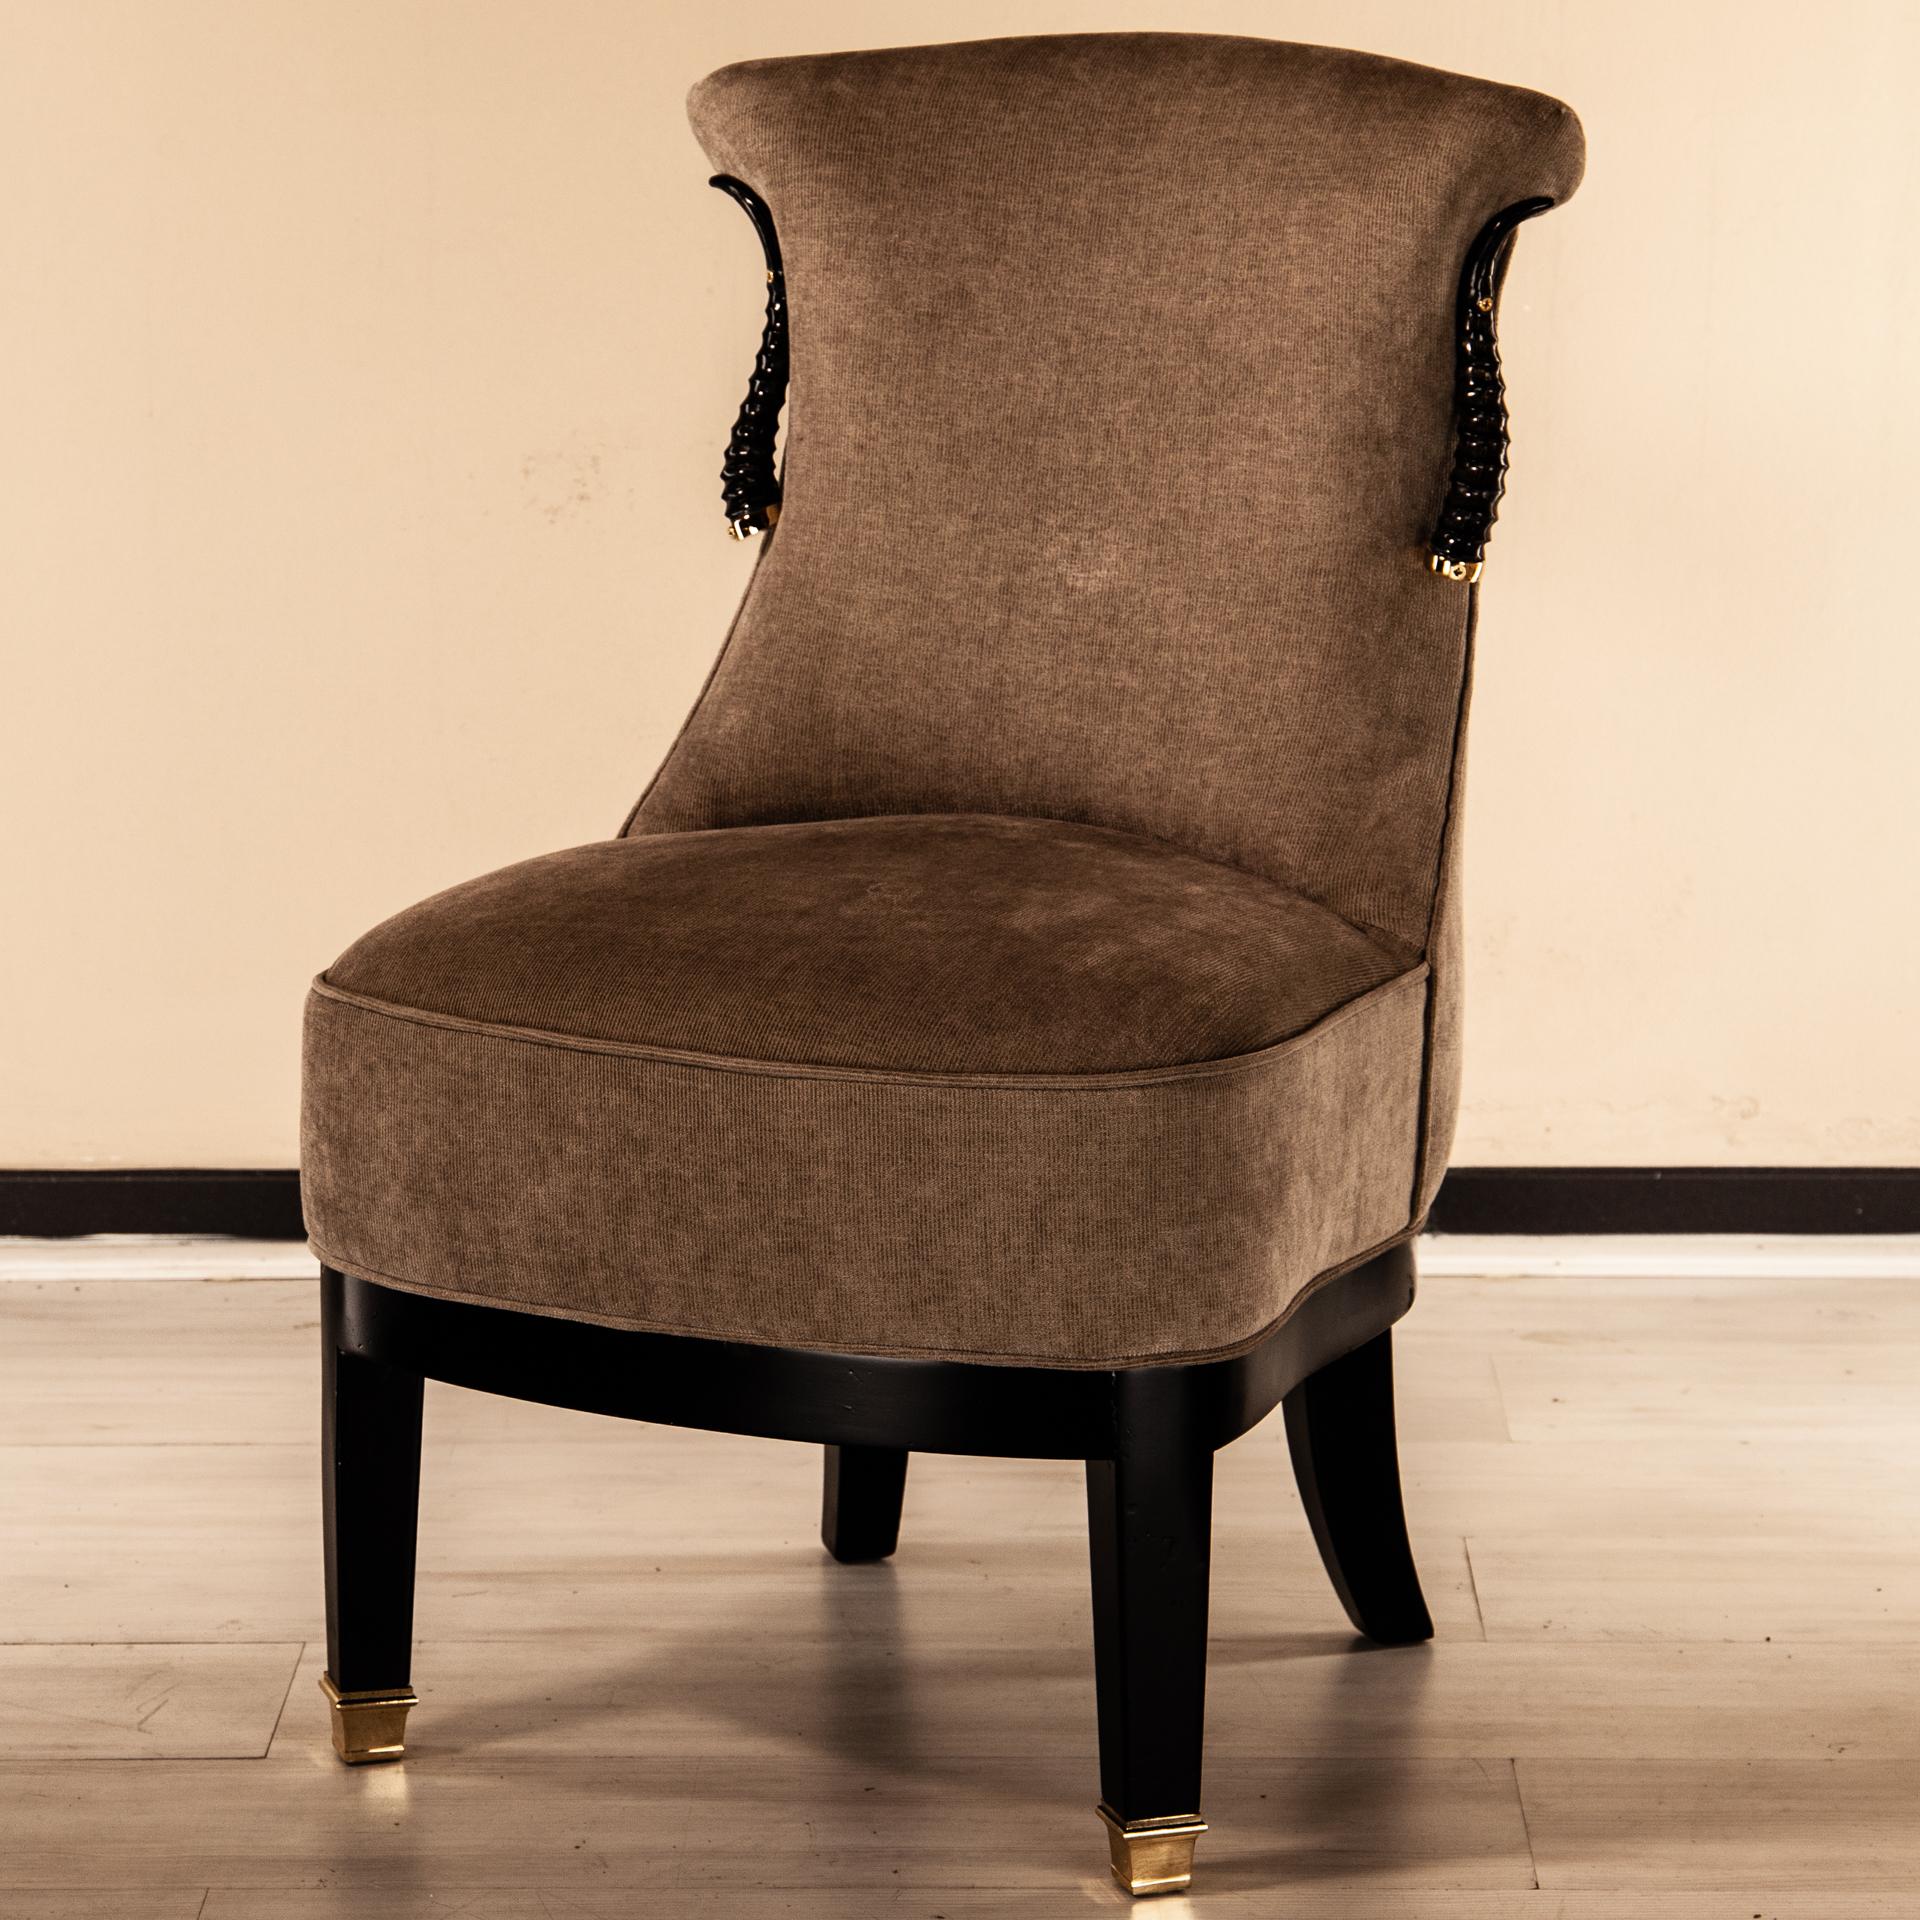 Armchair with real gazelle horn gazzella, shown upholstered in fabric, with piping stitching.
Fully padded upholstery. All metal parts are solid brass.

Accent chair to be placed next to a sofa or framing a low consolle.

Recaptures Anthony